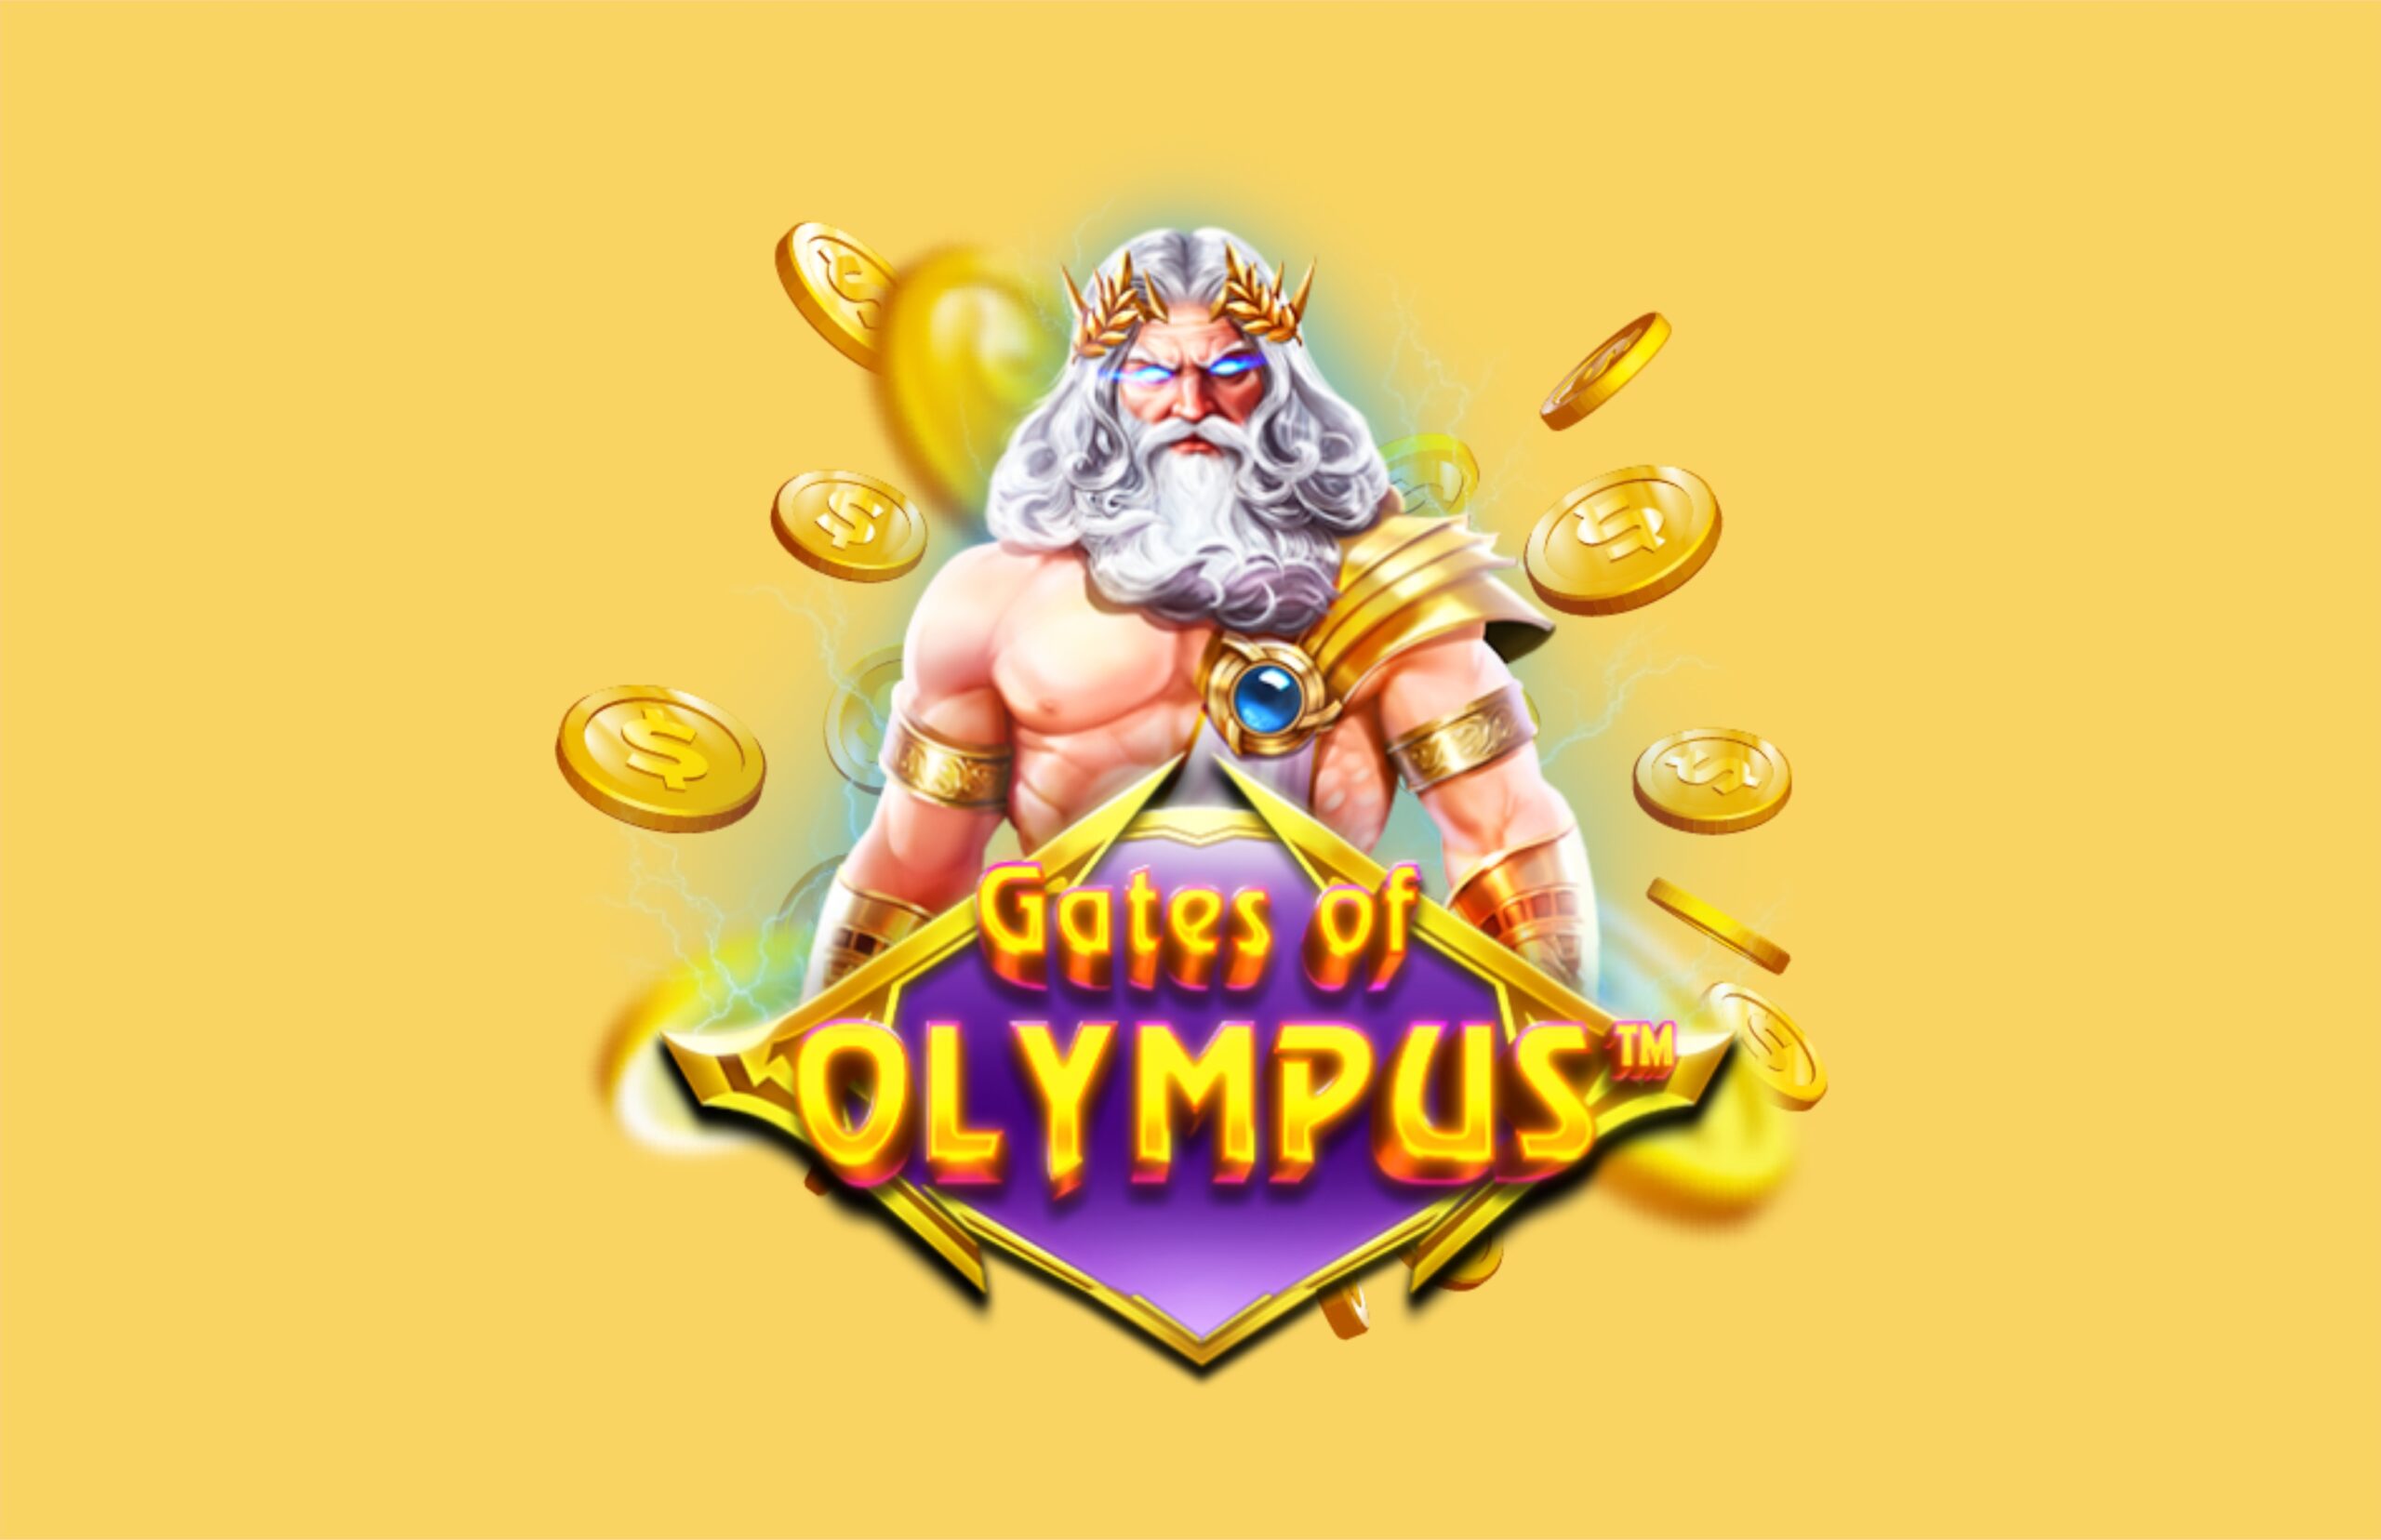 Gates of Olympus Slot Review: Ancient Greece Themed Slot